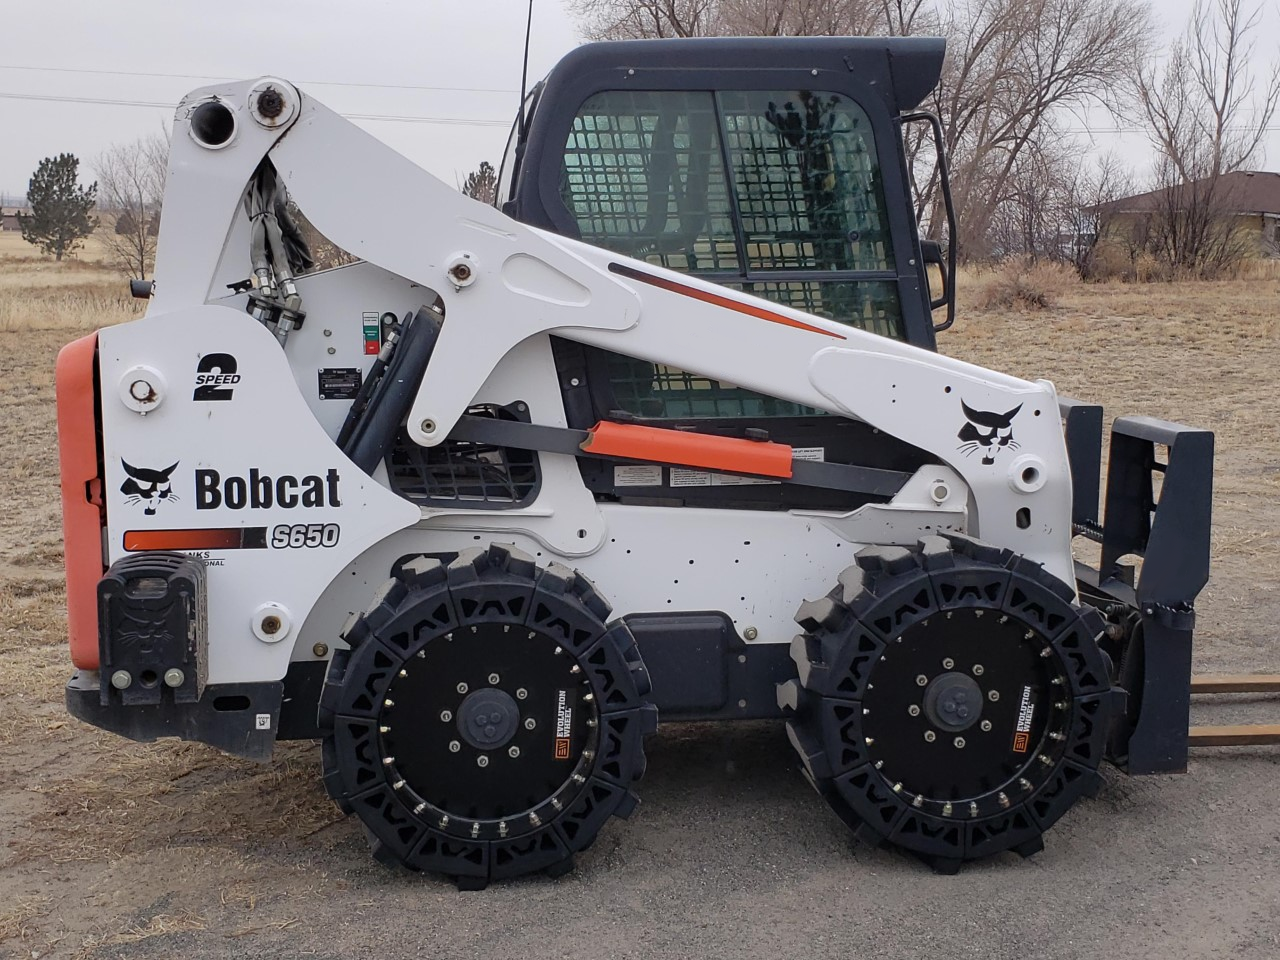 This image shows a White Bobcat S650 Skid Steer using our all terrain skid steer tires.